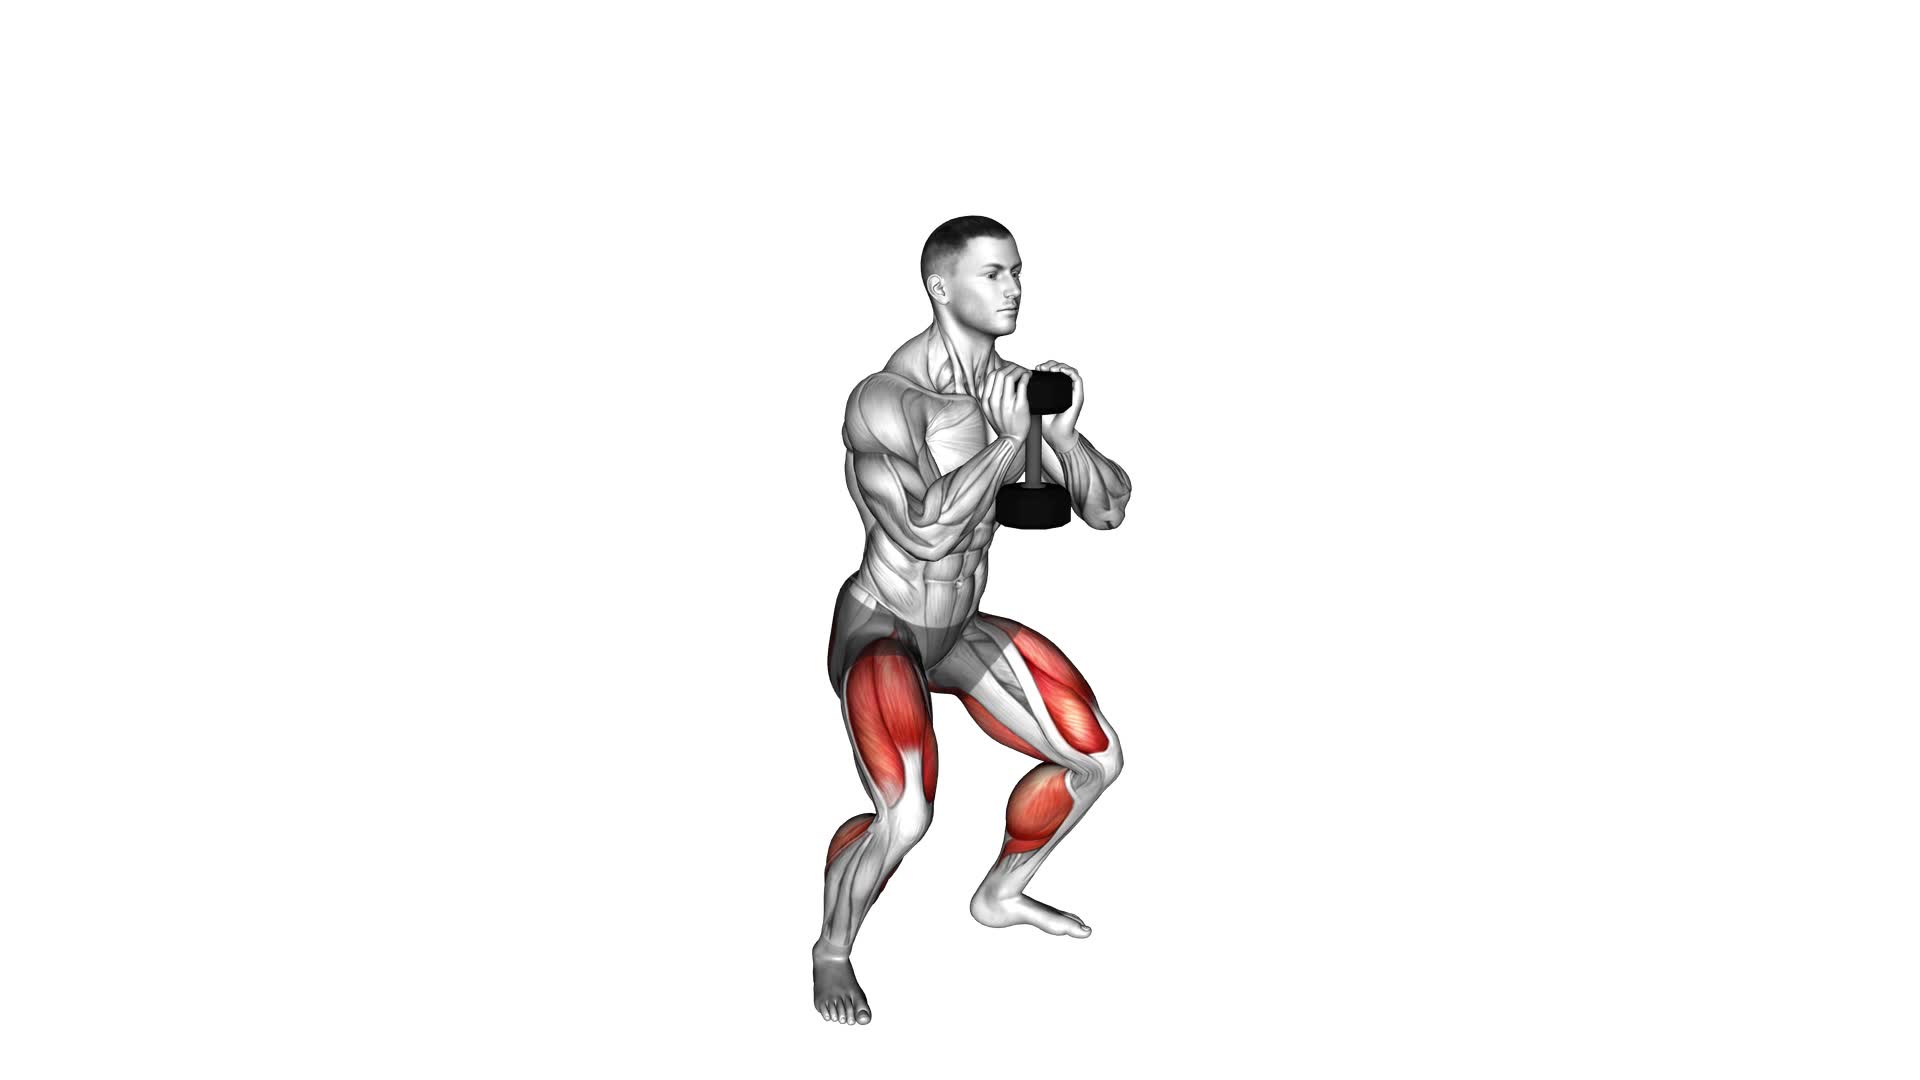 Dumbbell Goblet Squat With Calf Raise - Video Exercise Guide & Tips